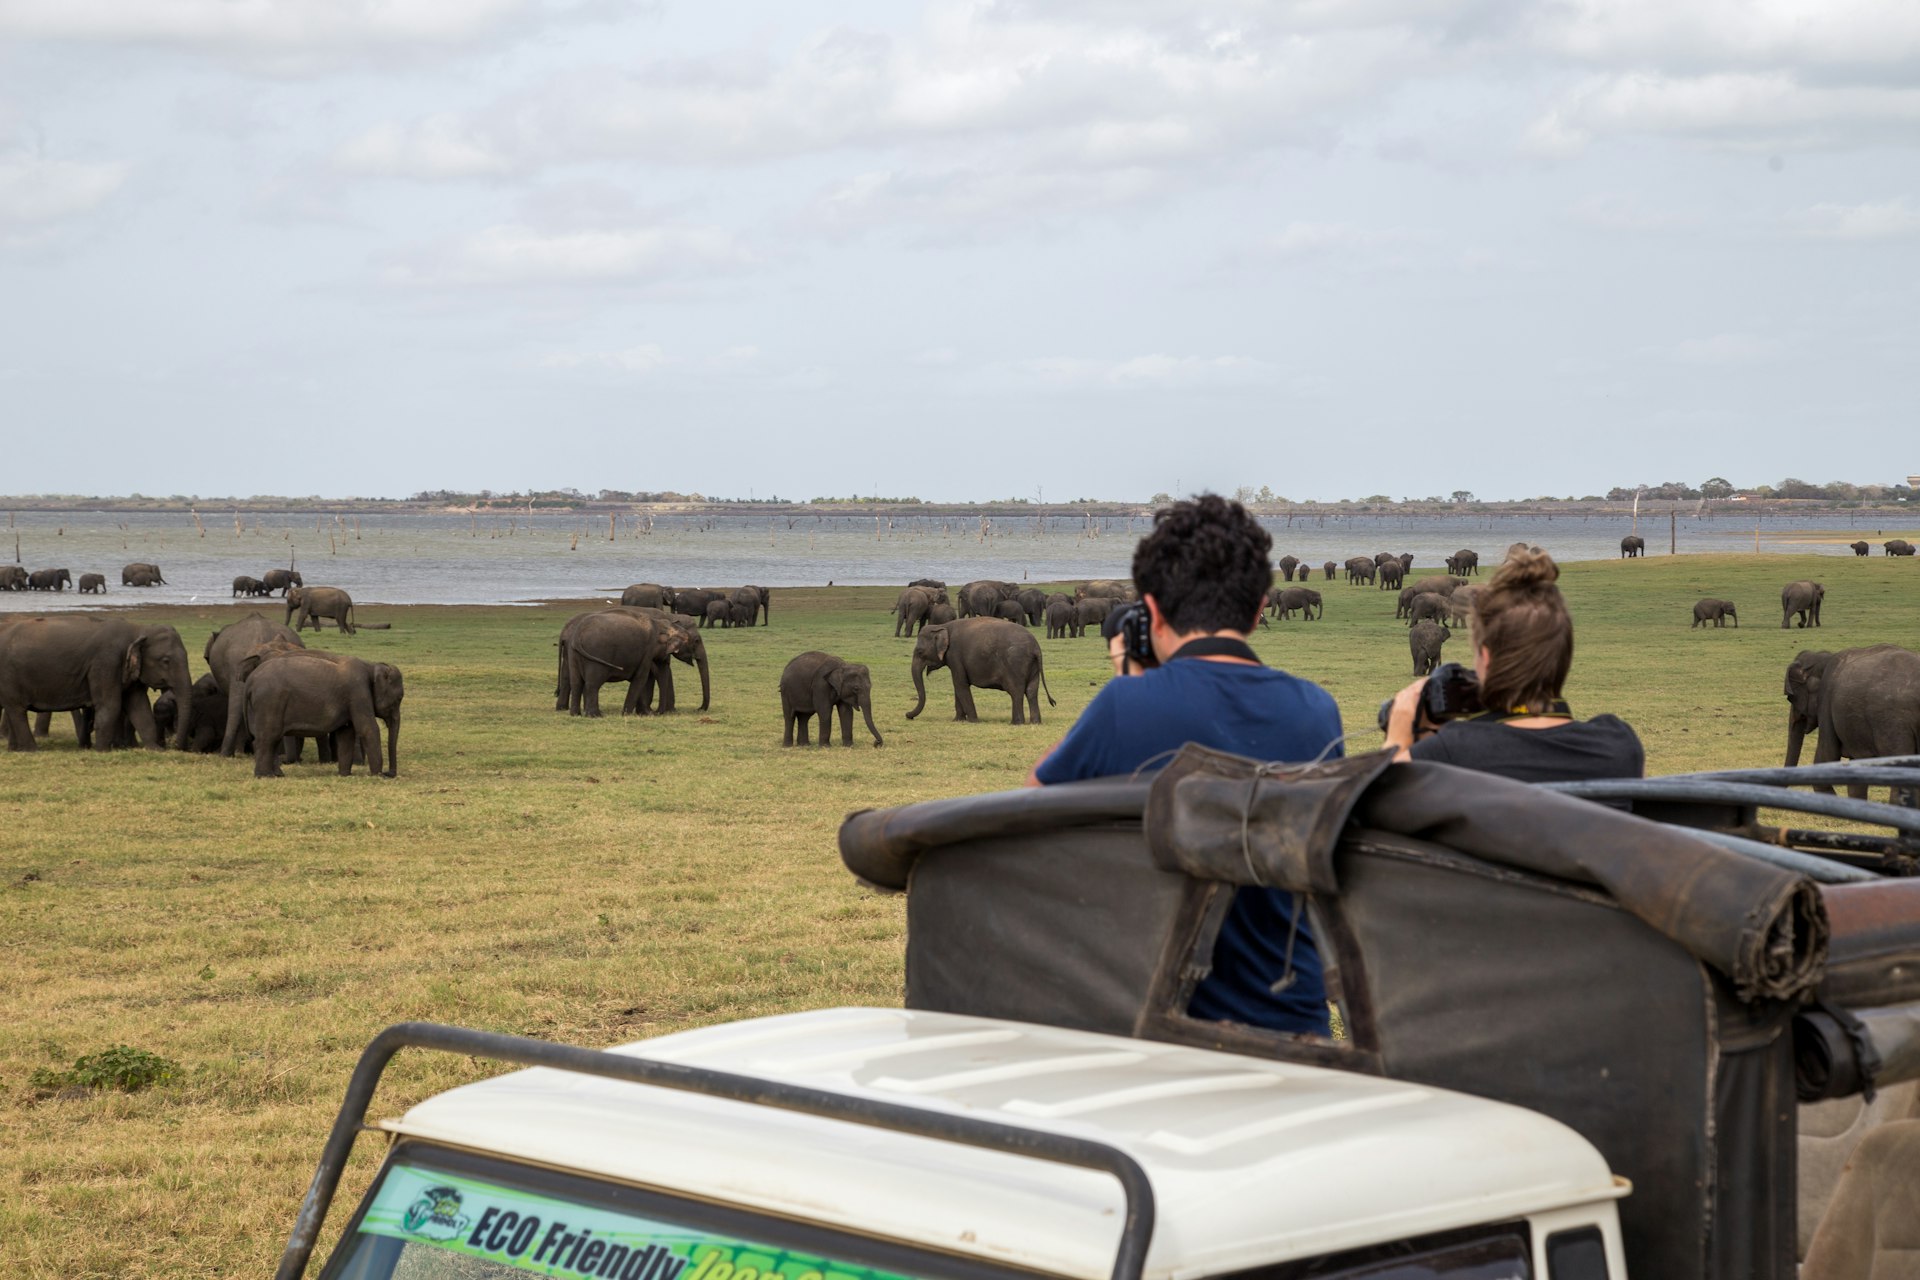 Two tourists take photos of elephants in the distance out the top of a safari van